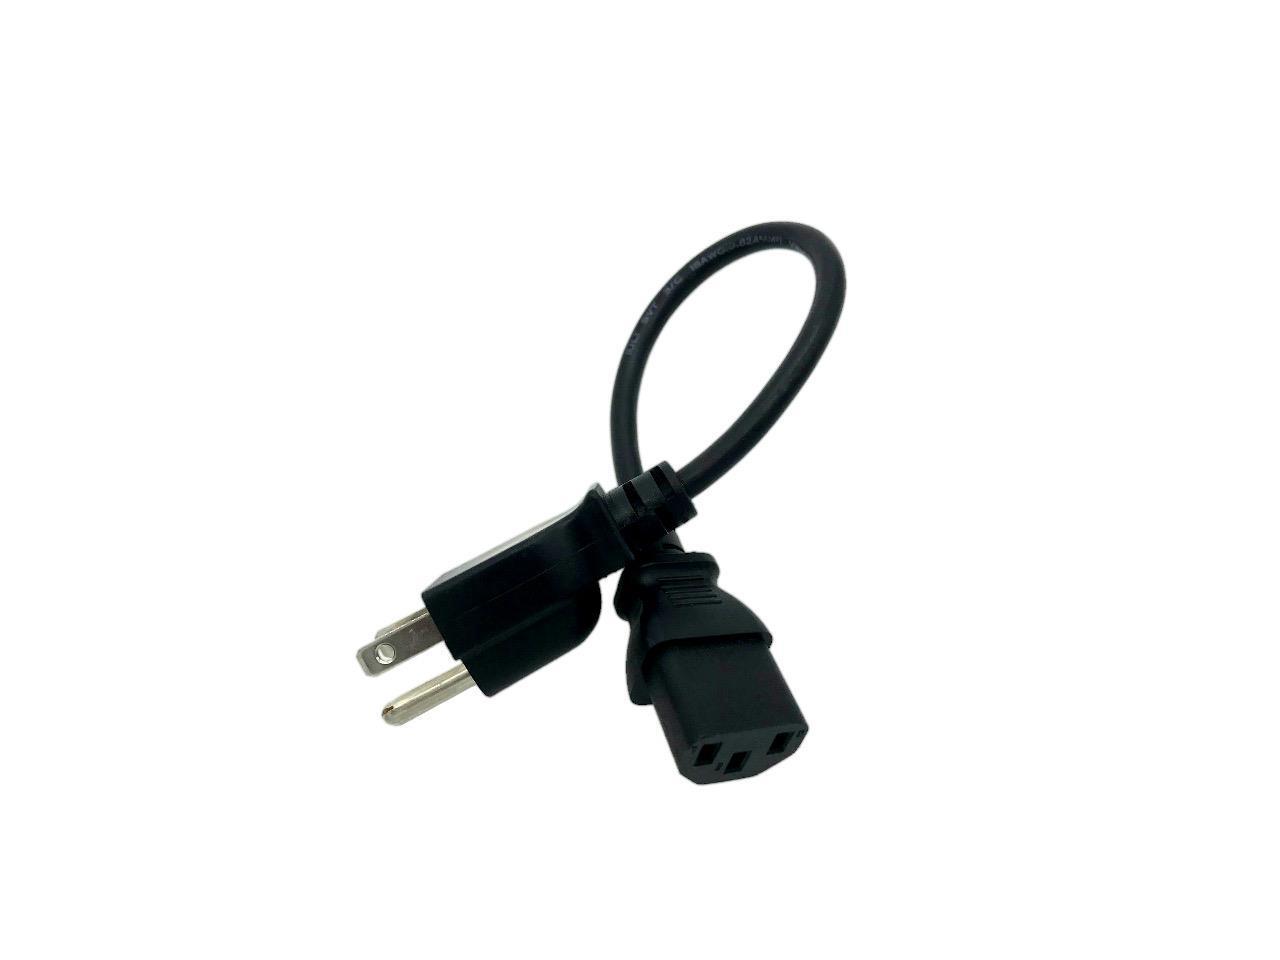 VIZIO E472VLE E550VA E550VL E551VA E552VLE TV power supply cord cable charger 